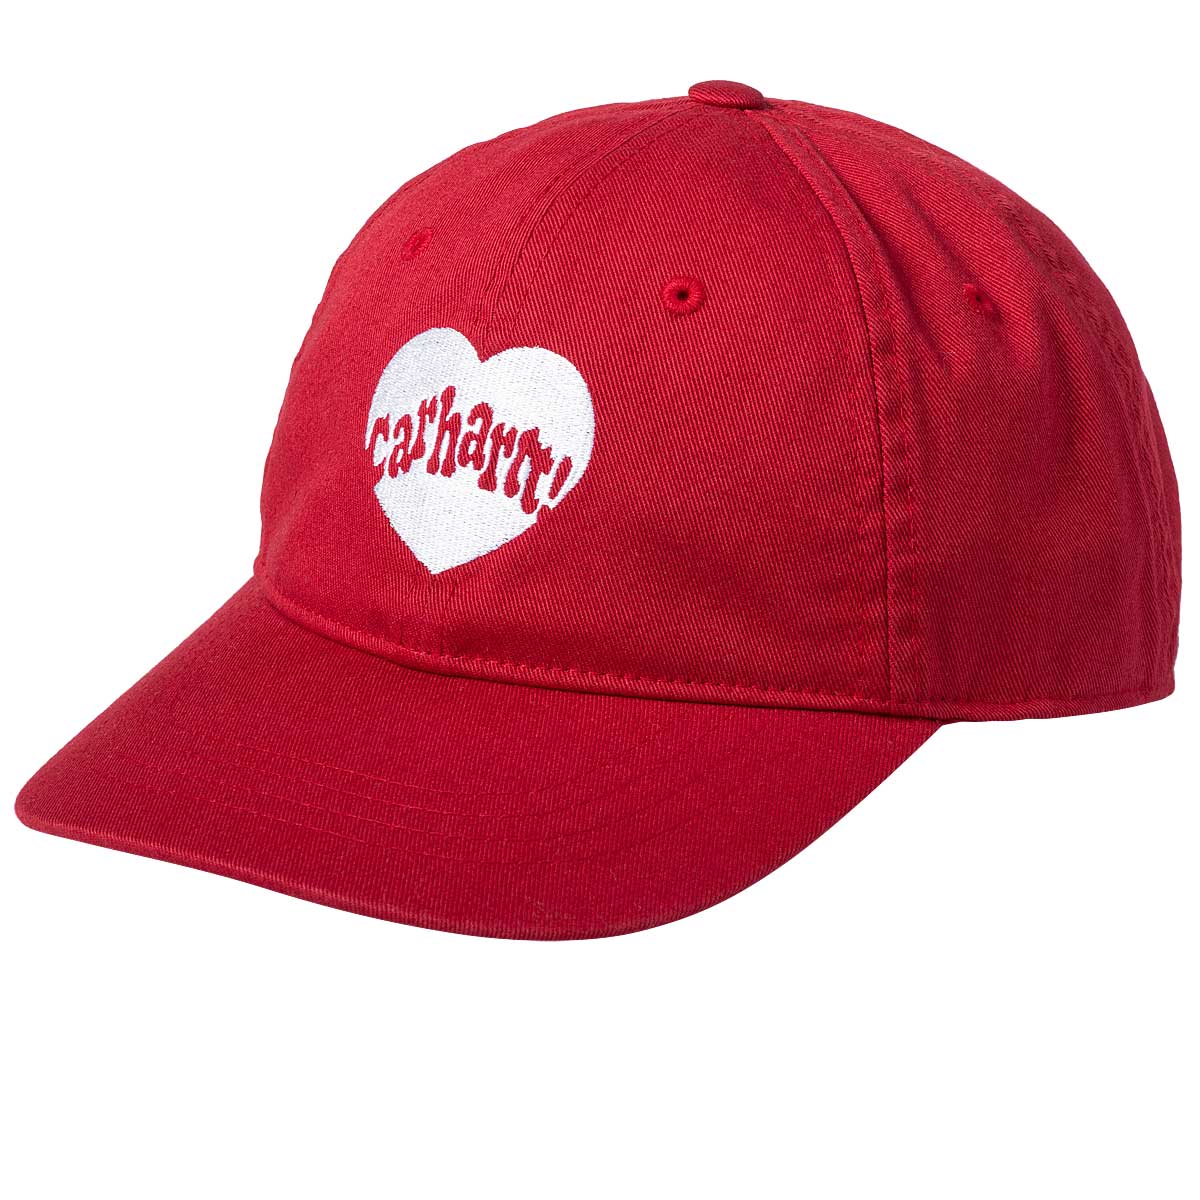 Carhartt Wip Amour Cap, Red/white ONE